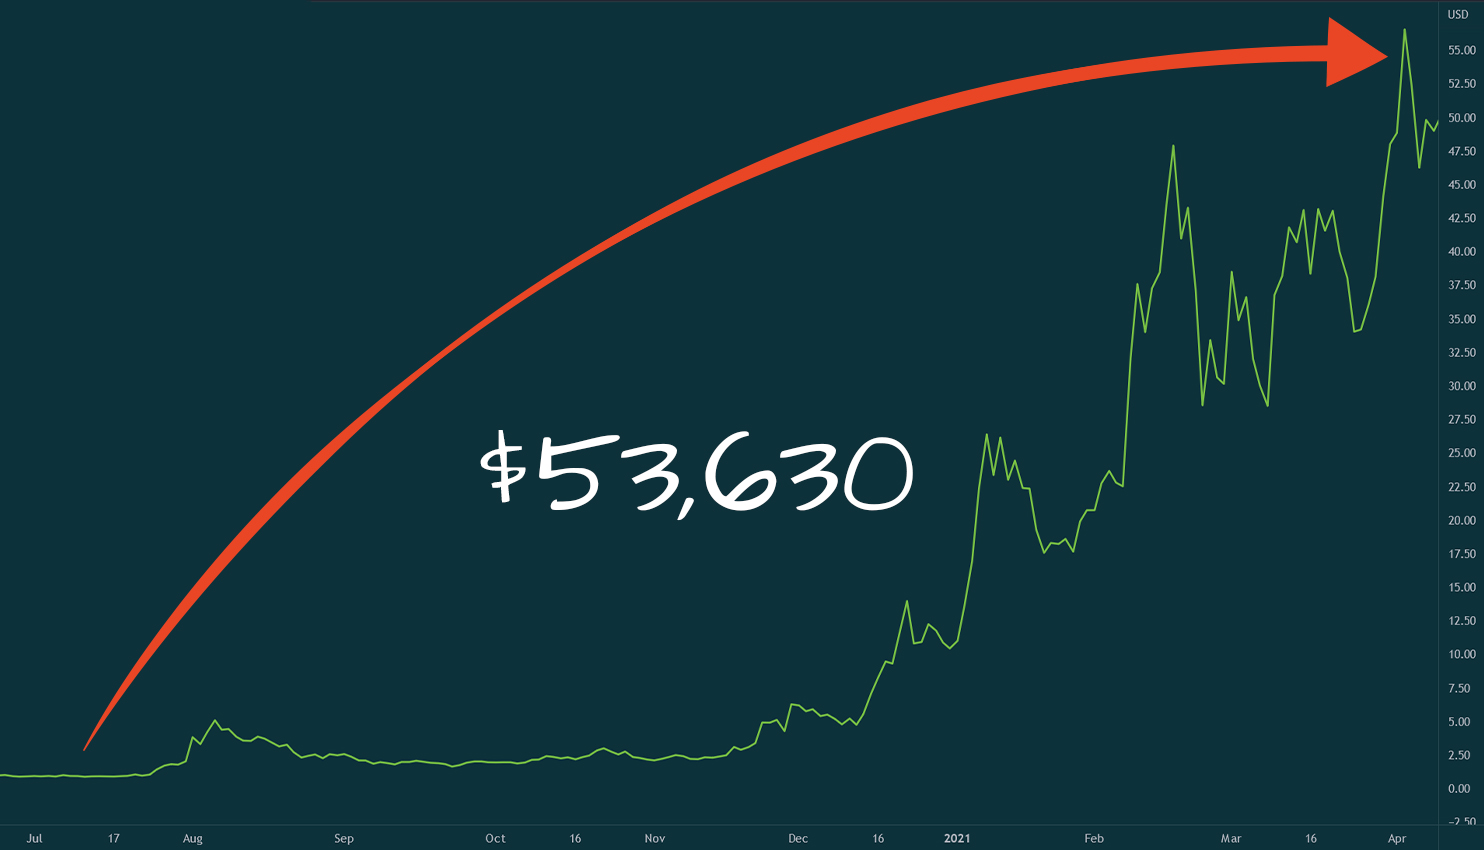 Chart with an increased worth of $53,630